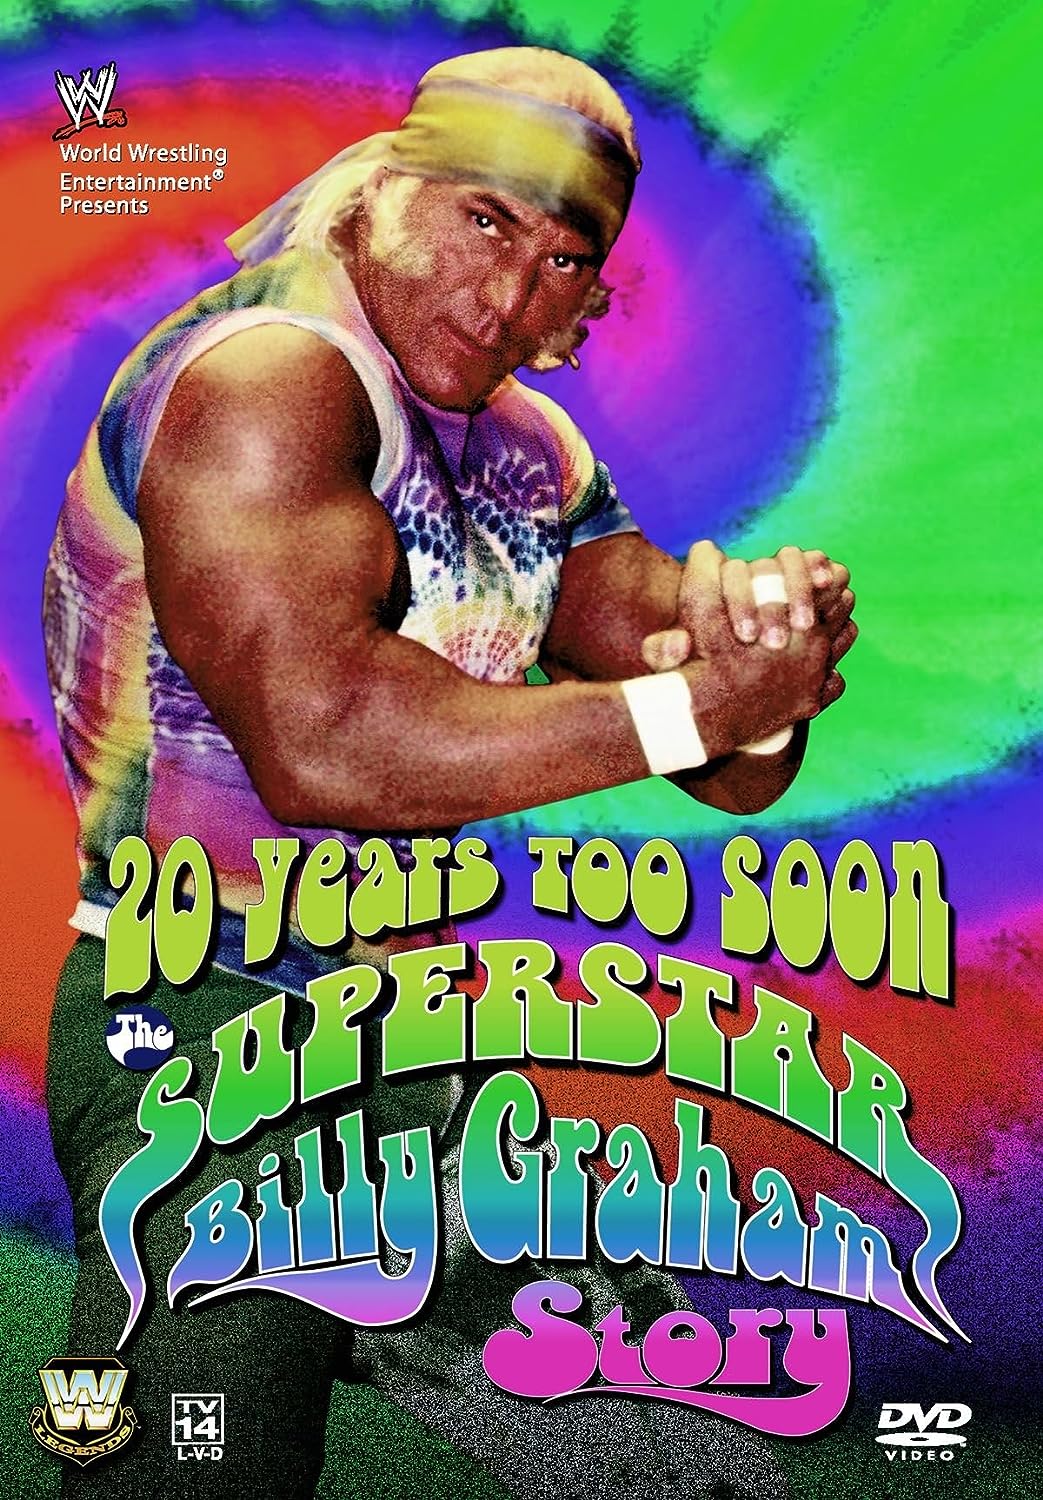 WWE: 20 Years Too Soon The Superstar Billy Graham Story